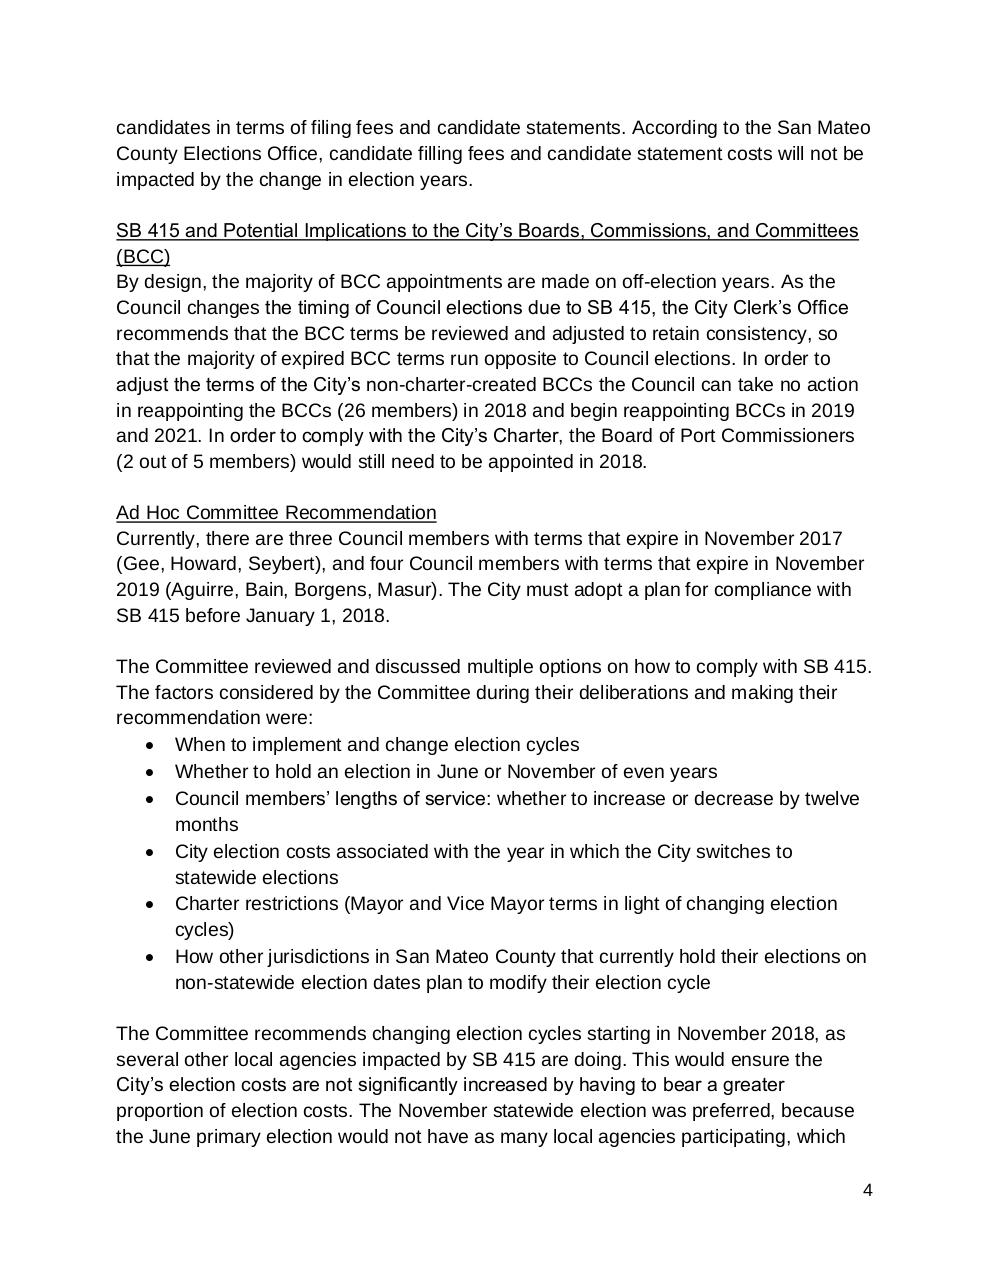 Staff Report on changing CC election 101716.PDF - page 4/8